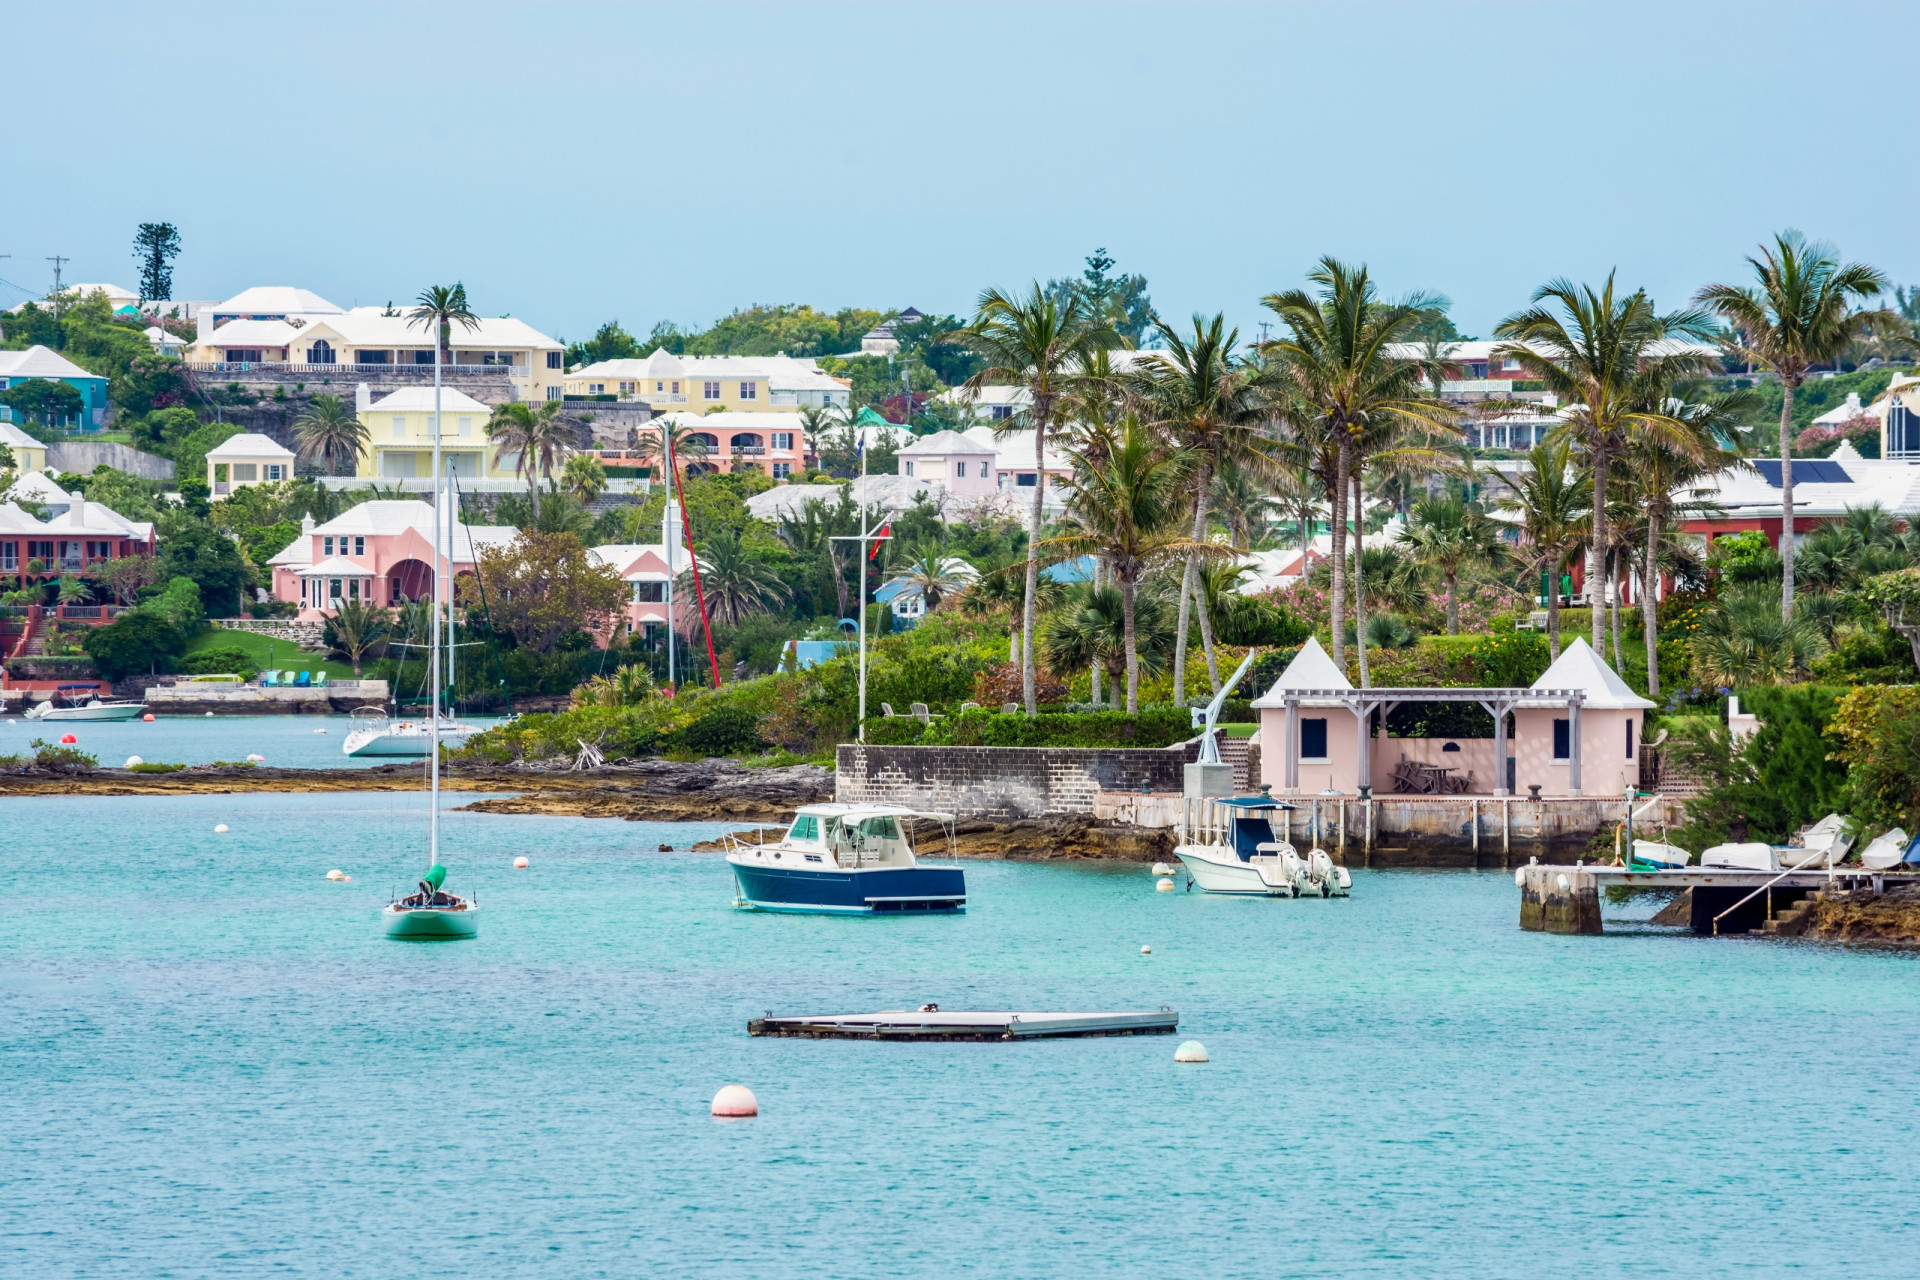 <p>In Bermuda's heart lies Hamilton, a tax haven and insurance powerhouse. With a rent index of 92.2, it's a blend of finance and tropical allure, making it a unique and costly residence.</p><p>You may also like:<a href="https://www.starsinsider.com/n/322539?utm_source=msn.com&utm_medium=display&utm_campaign=referral_description&utm_content=651794en-in"> All the beautiful women Leonardo DiCaprio has romanced</a></p>